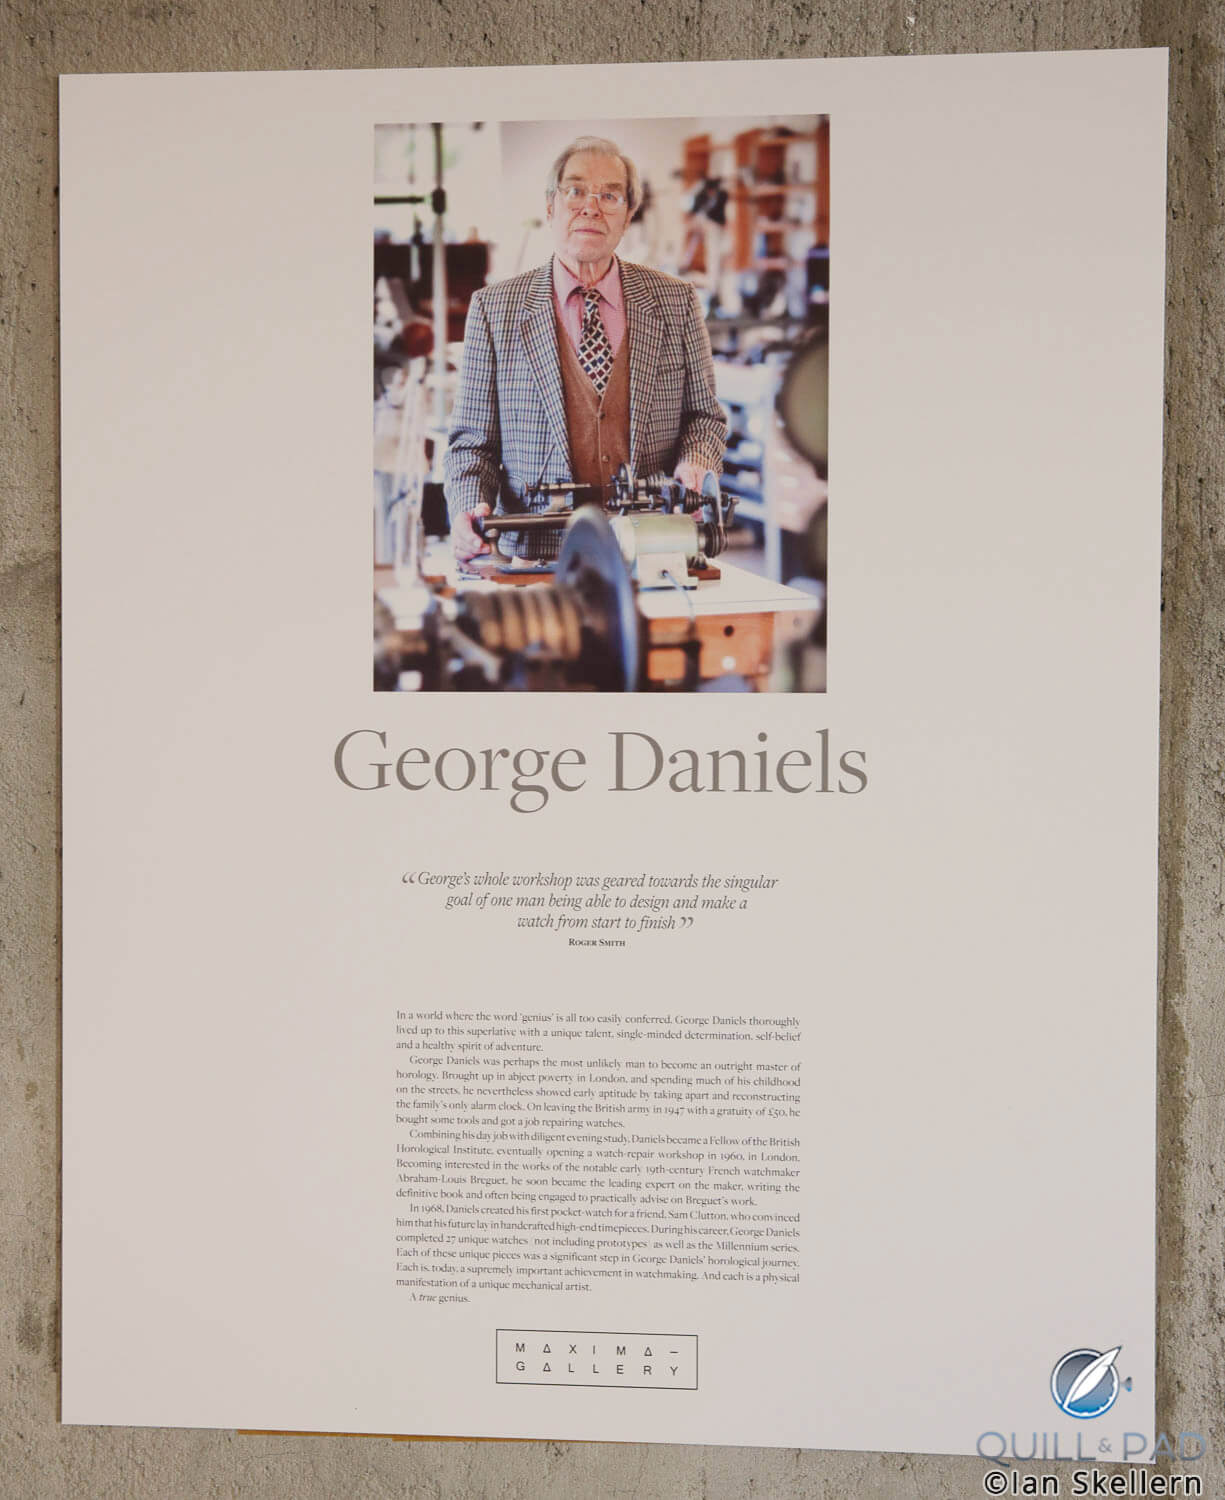 Missed but not forgotten, George Daniels was represented at teh exhibition by an Anniversary watch on display